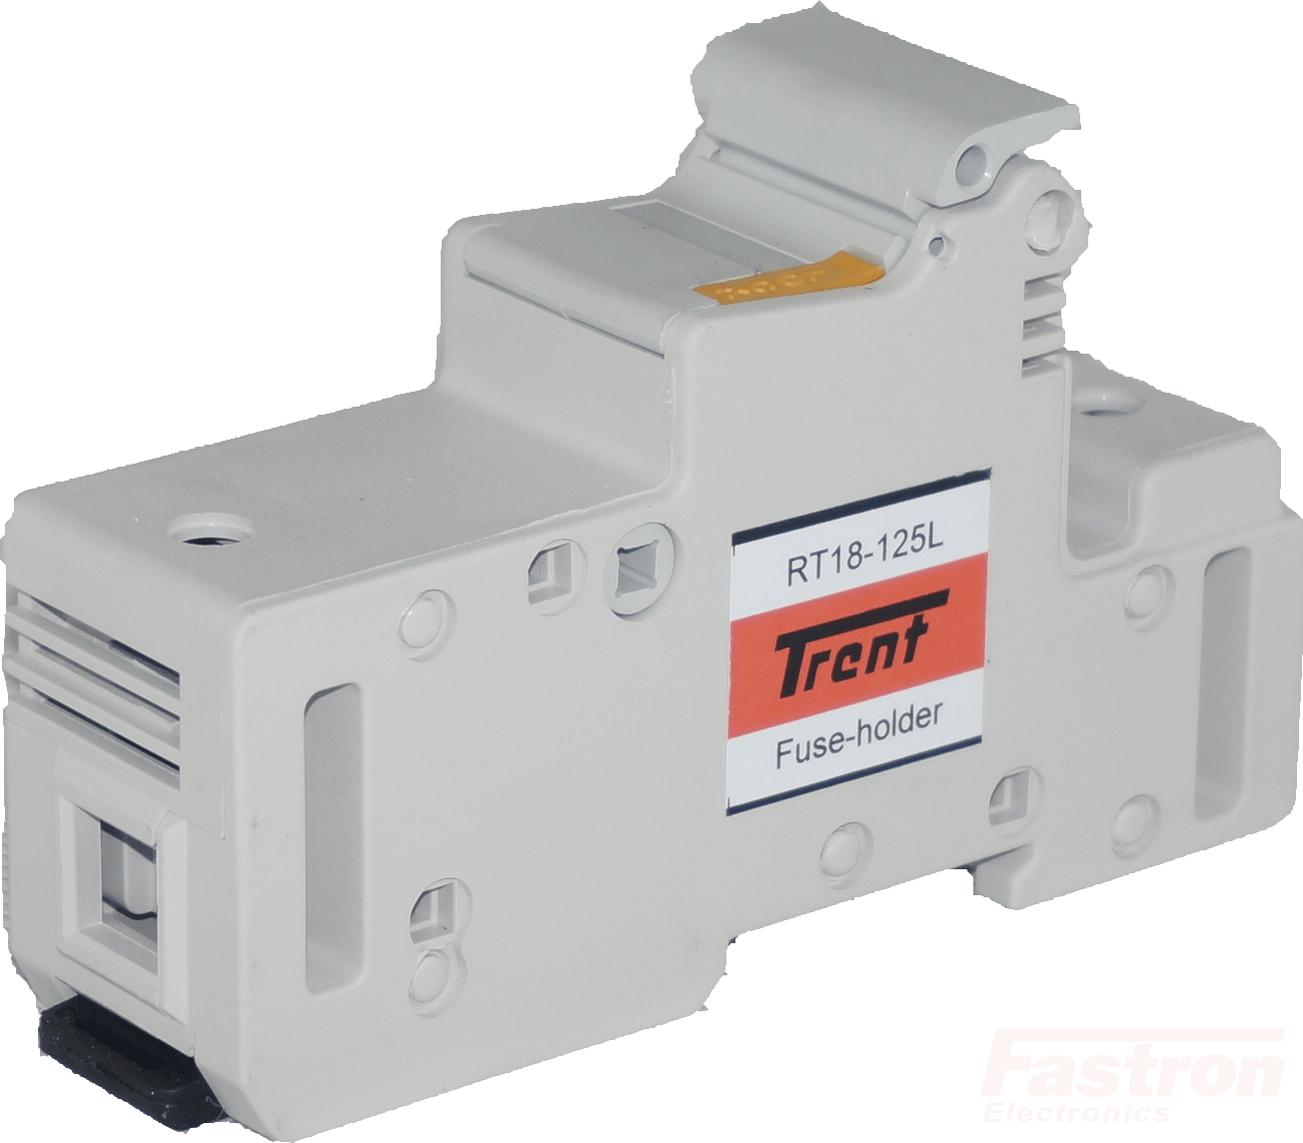 Trent gR Semiconductor Fuse Holder RT18-63L, Quick Release Fuse Holder/Cartridge for 25 to 63 Amp 14 x 51mm Fuse FE-RT18-63L